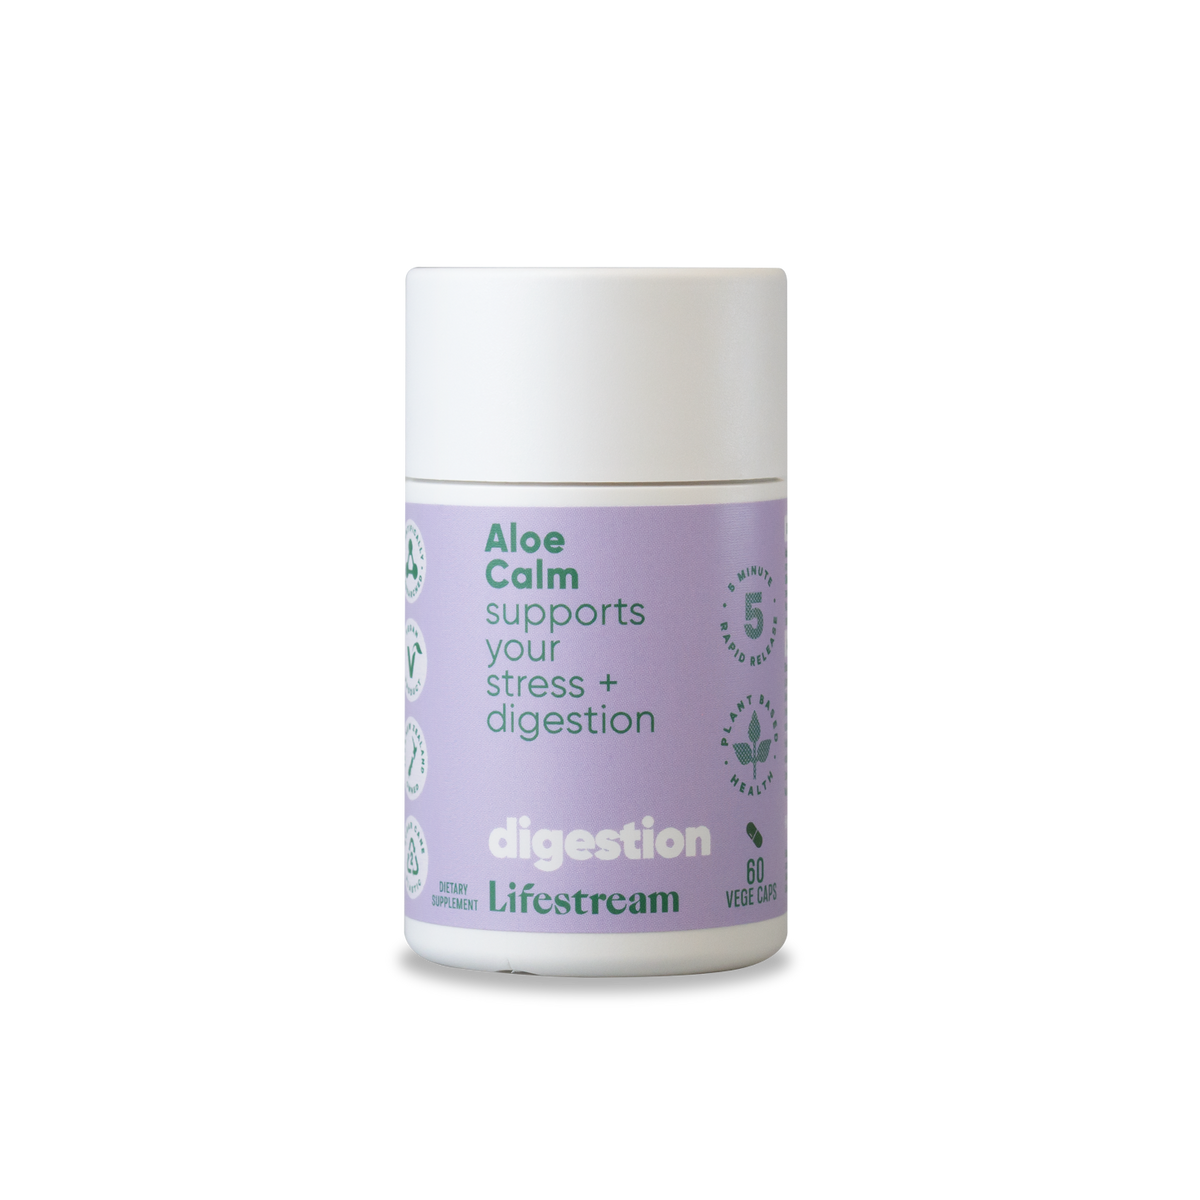 Aloe Calm supports your stress and digestion